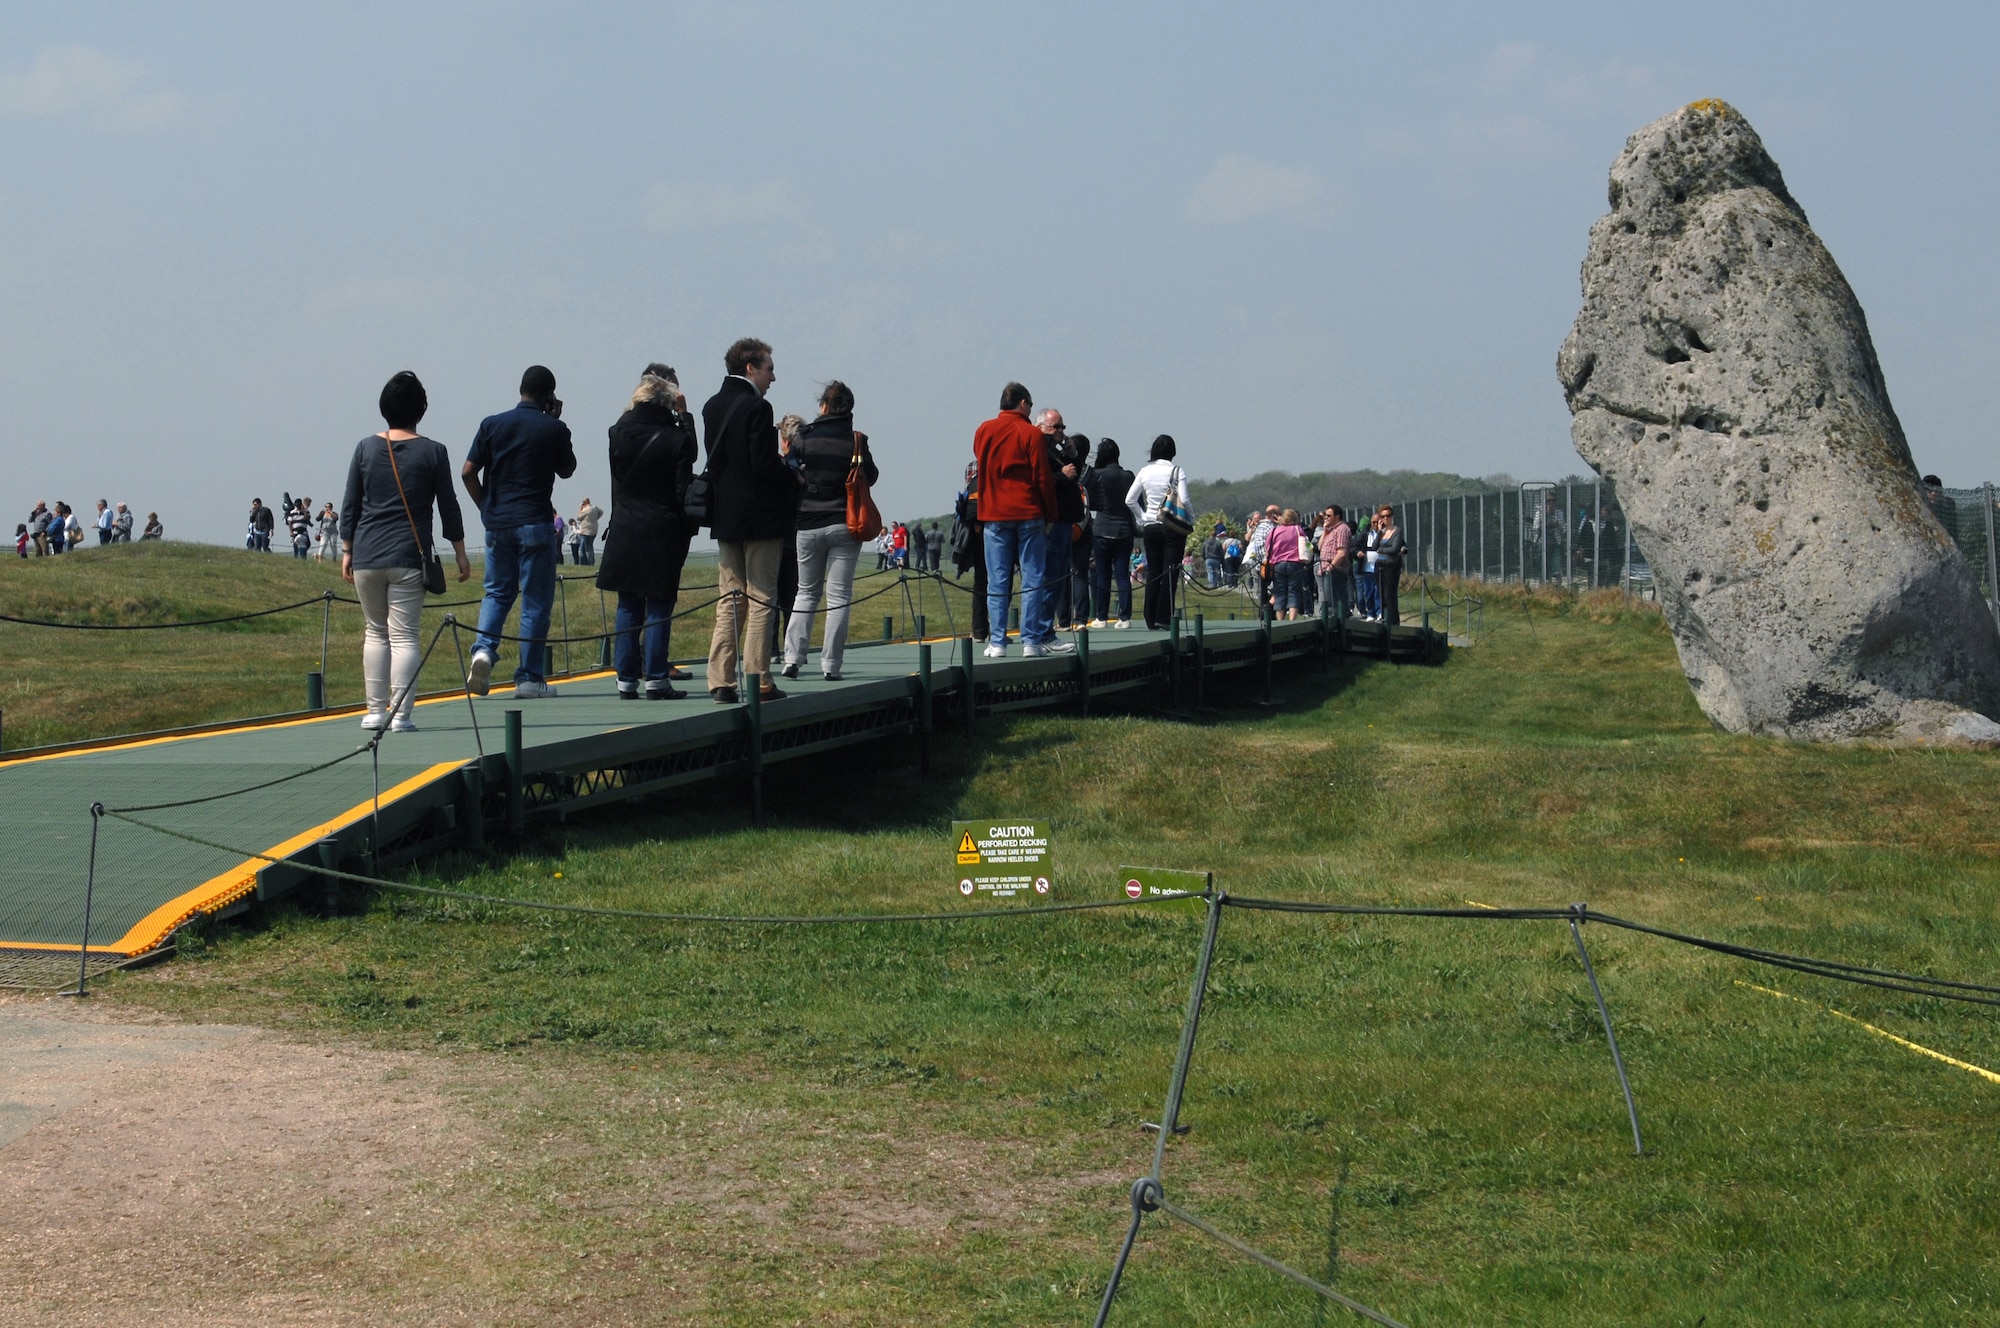 WILTSHIRE, England -- Tourists from around the globe get an up close look at the Heelstone. Constructed from blue and sarsen stones from across the UK, Stonehenge is one of the most famous archeological wonders in the world.  The RAF Lakenheath Information, Tickets and Travel office recently offered a trip to Wiltshire, England to visit the historical site.  During the free roaming tour, visitors could listen to a recording to learn in-depth information about the various stages of construction, historical uses of the site and the significance of certain stones within the circle.  The site, is believed to have been constructed between 3,000 ? 2,200 B.C.  The RAF Lakenheath ITT office offers several trips every month destinations around the UK. The next trip to Stonehenge Inner Circle Access and Windsor is scheduled for May 21, 2011. The next trip to Stonehenge and the City of Salisbury is scheduled for June 12, 2011.  (Editor's note: No federal endorsement is intended or implied concerning places of interest covered by the 48th Fighter Wing Public Affairs.)  (U.S. Air Force photo/Tech. Sgt. Lee A. Osberry Jr.)

